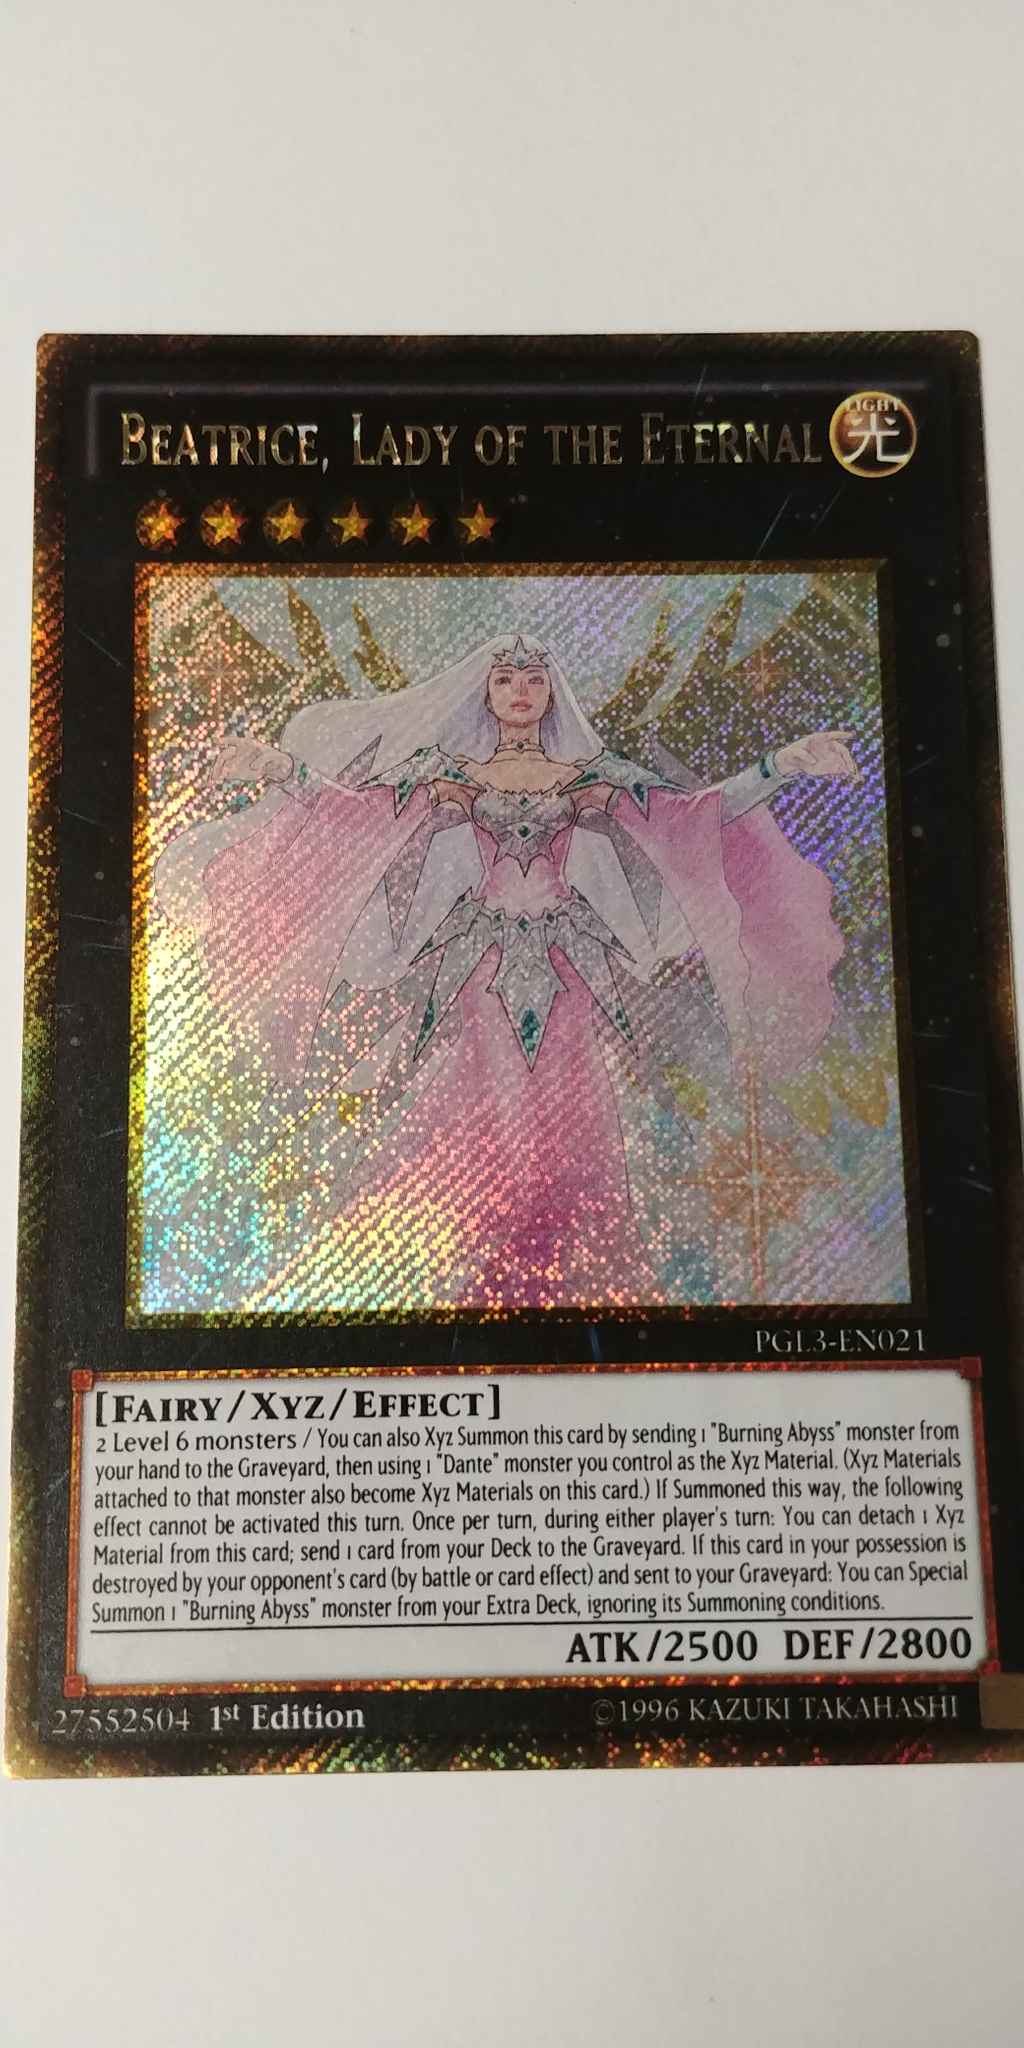 Lady Of The Eternal PGL3-EN021 1st Edition 1x Gold Rare Beatrice